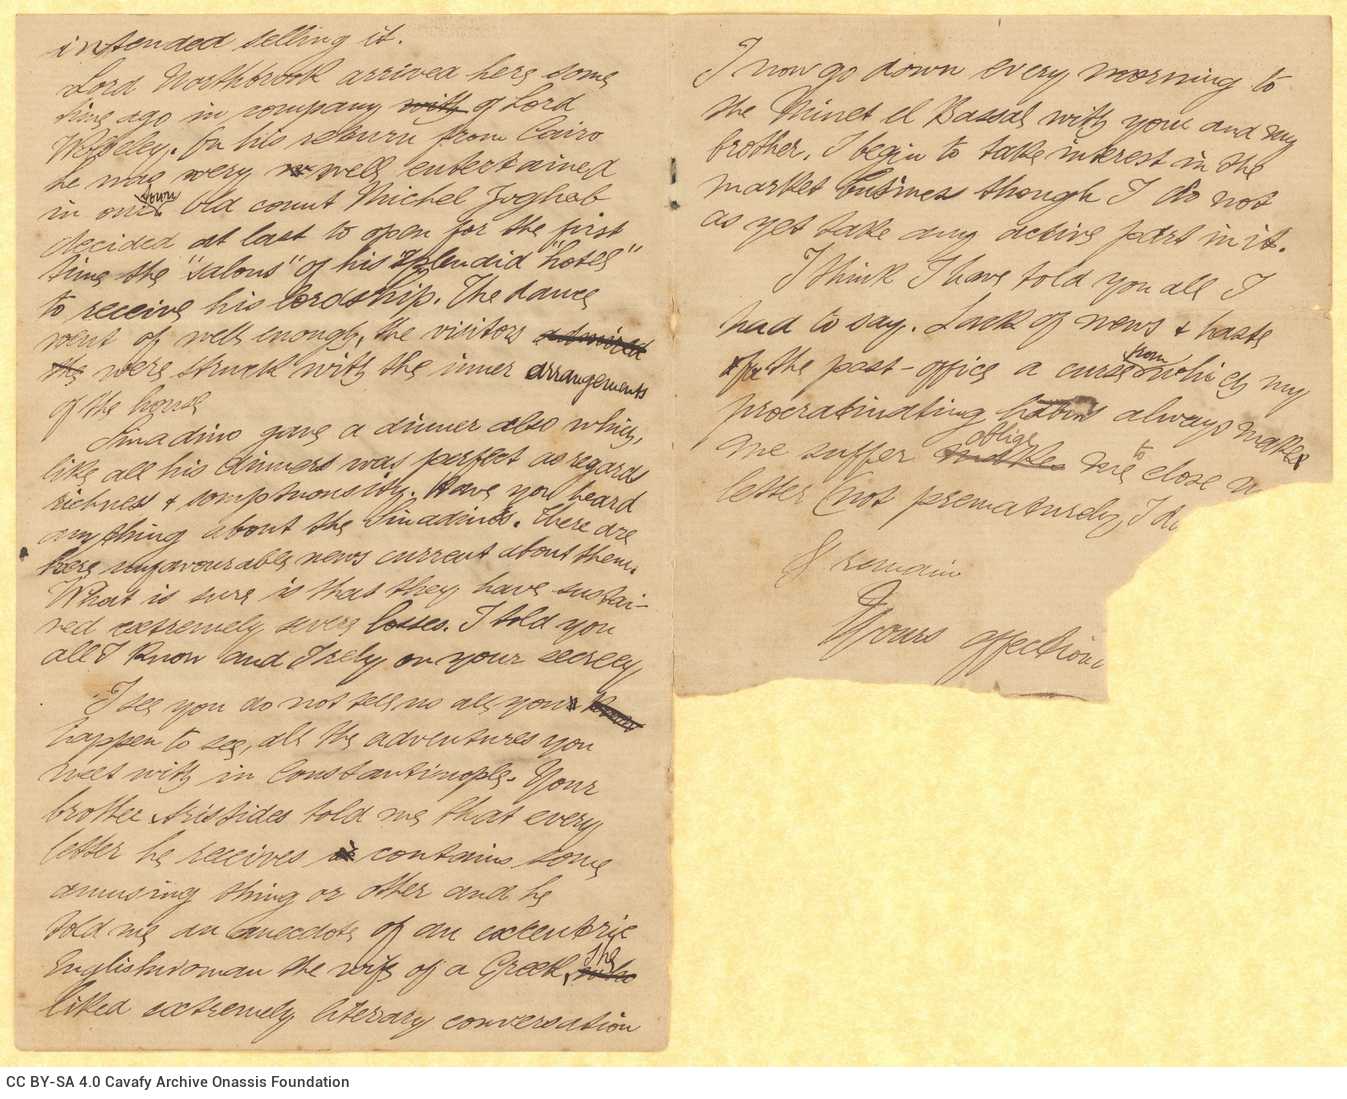 Handwritten letter by Stephen Schilizzi to Cavafy in one sheet two bifolios. The last page is blank. Comments on remarks appa